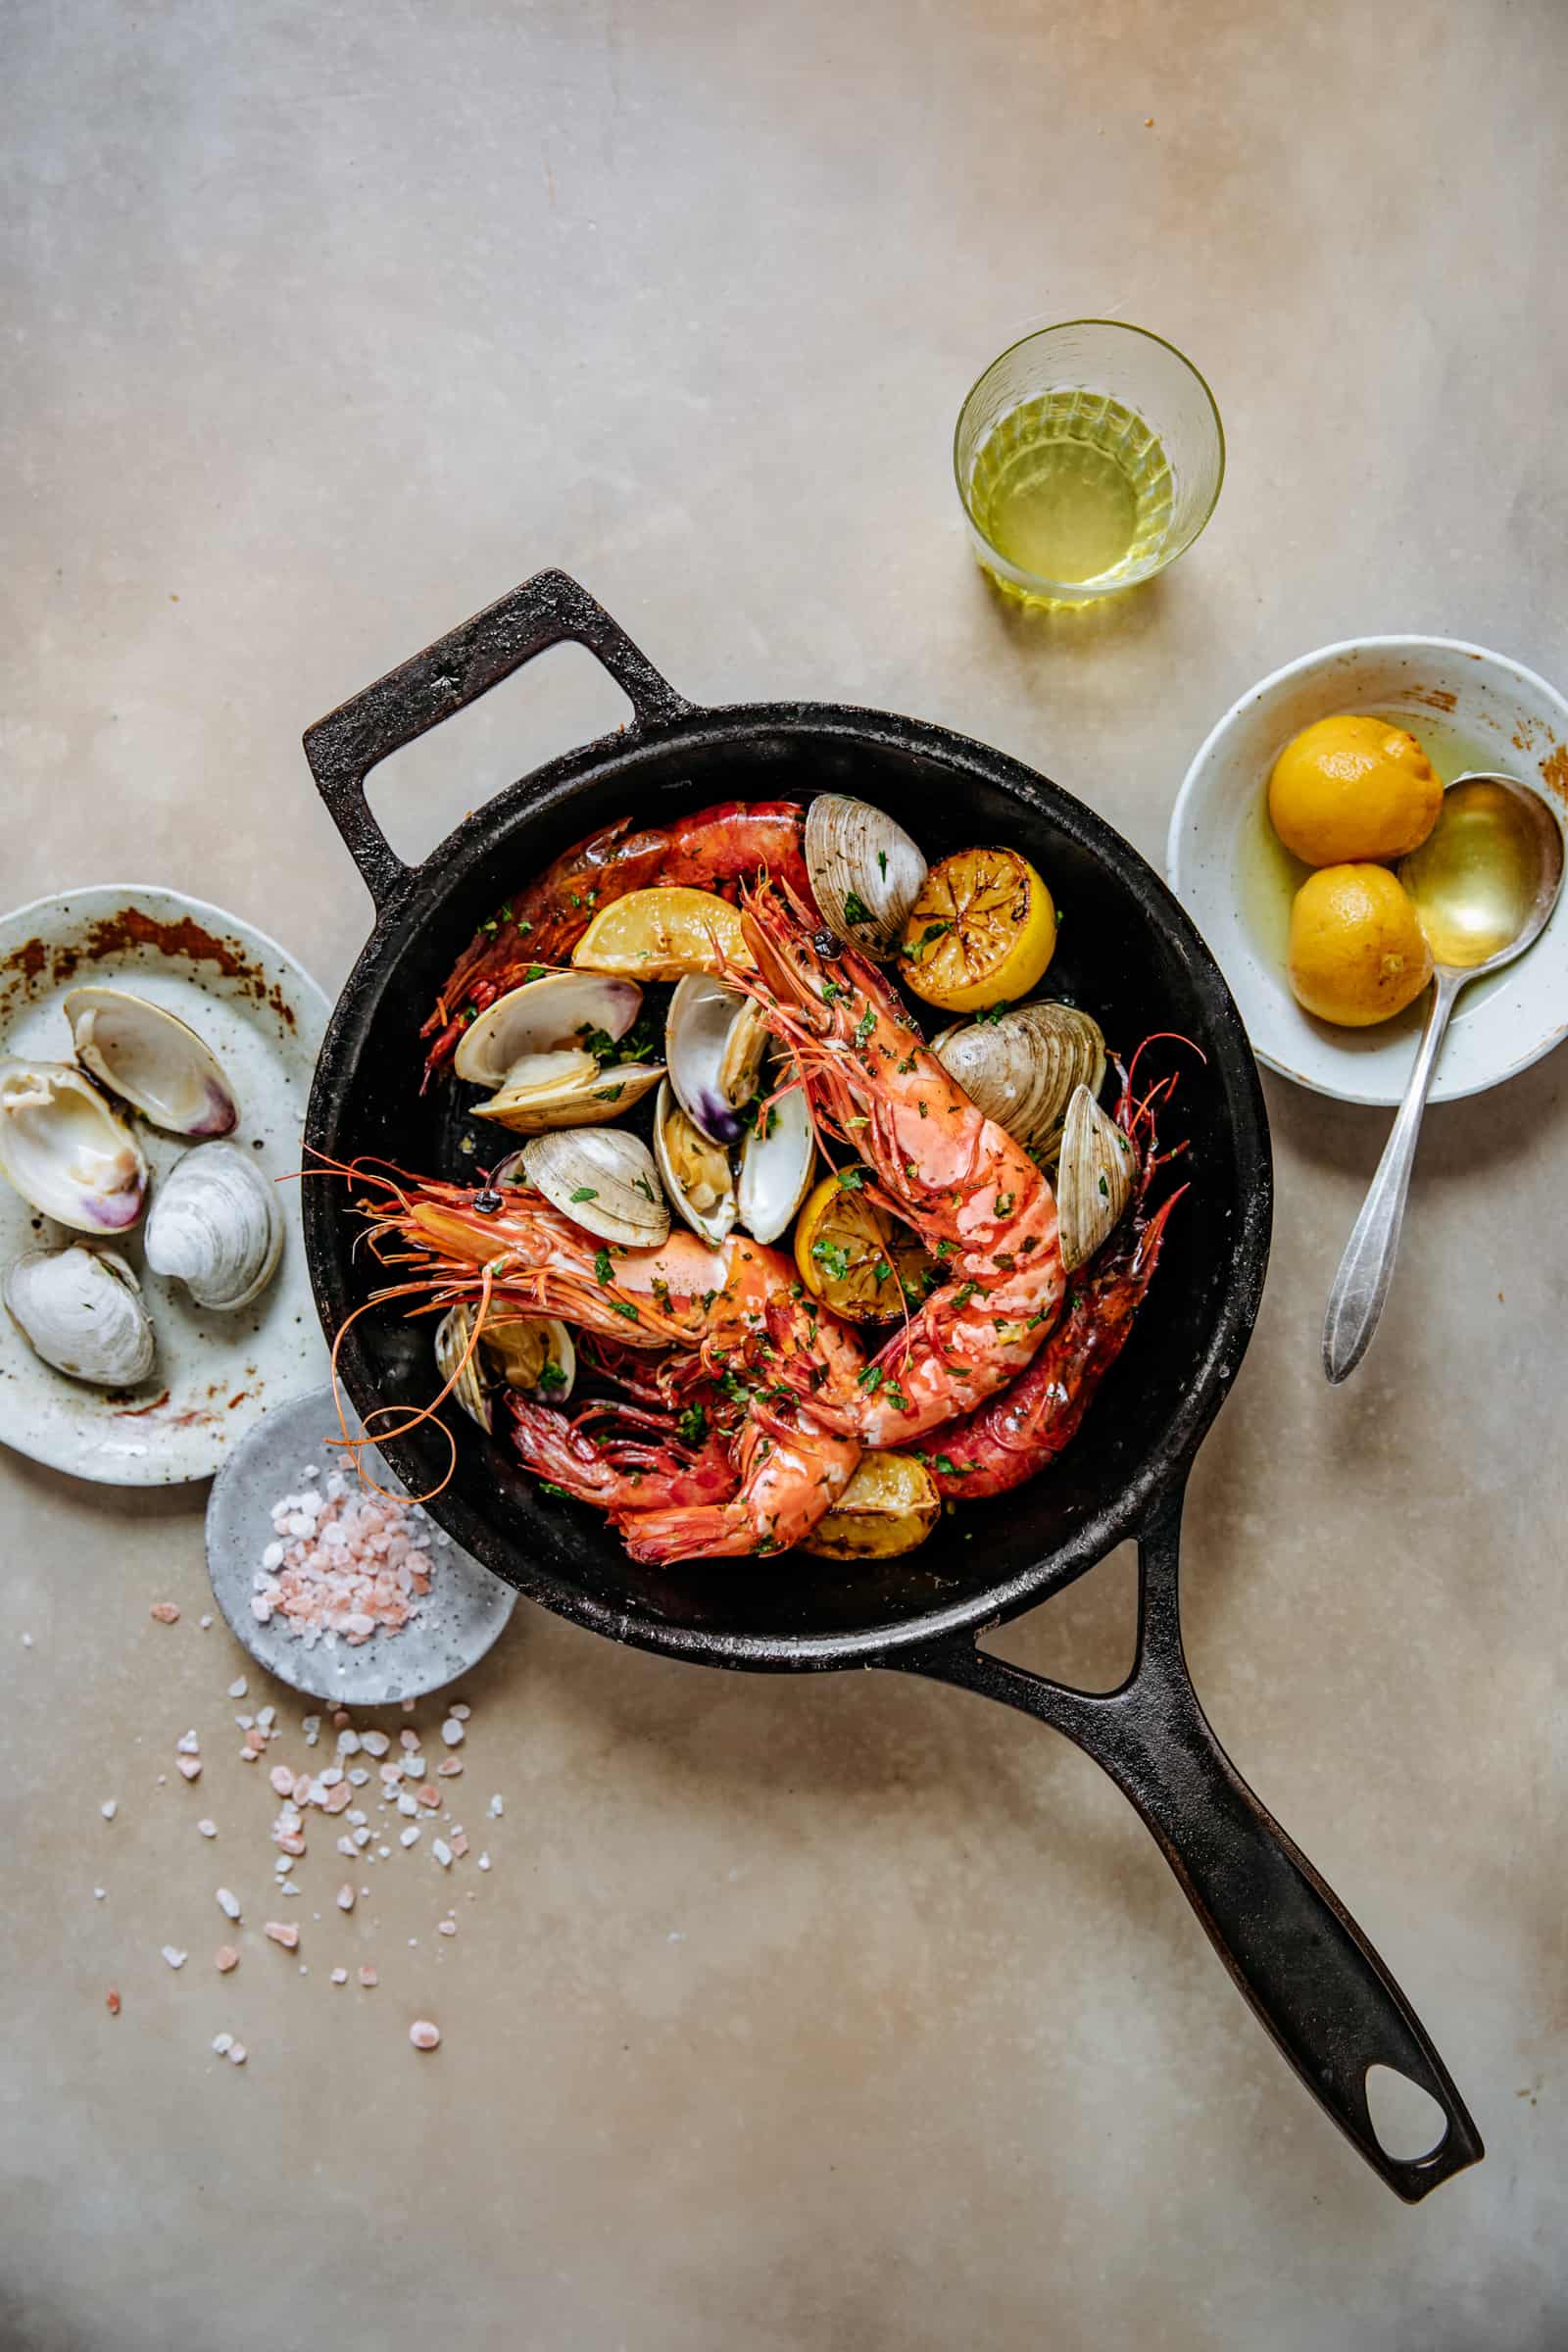 Roasted Colossal Prawns with Clams & Gremolata — add1tbsp